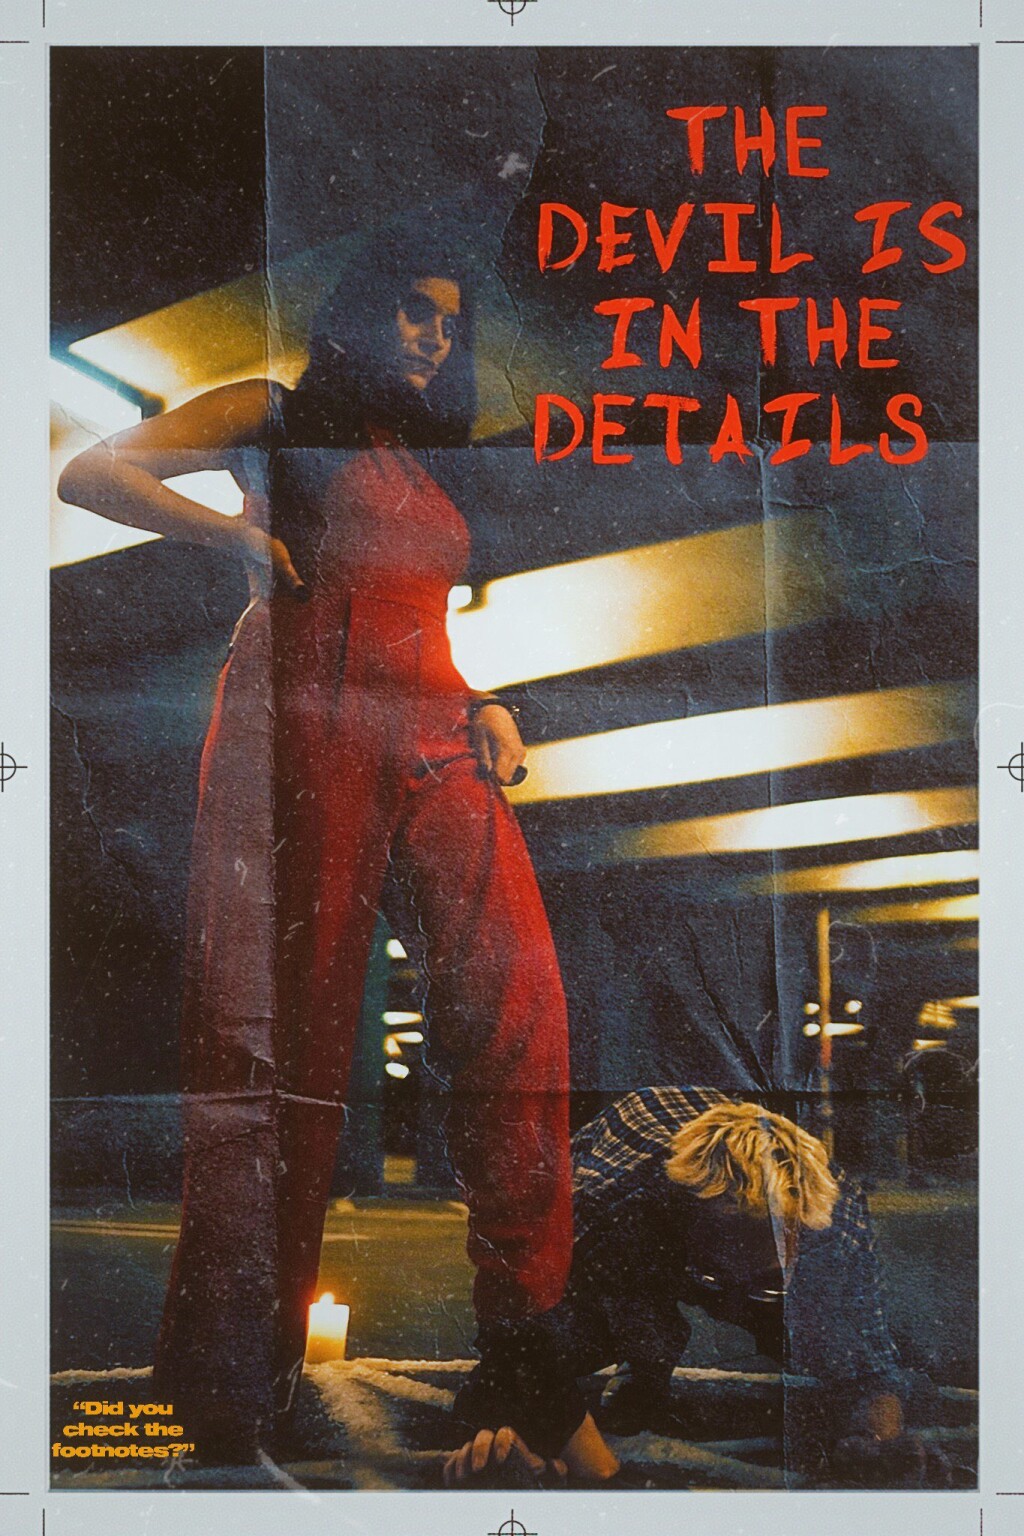 Filmposter for The Devil is in the Details